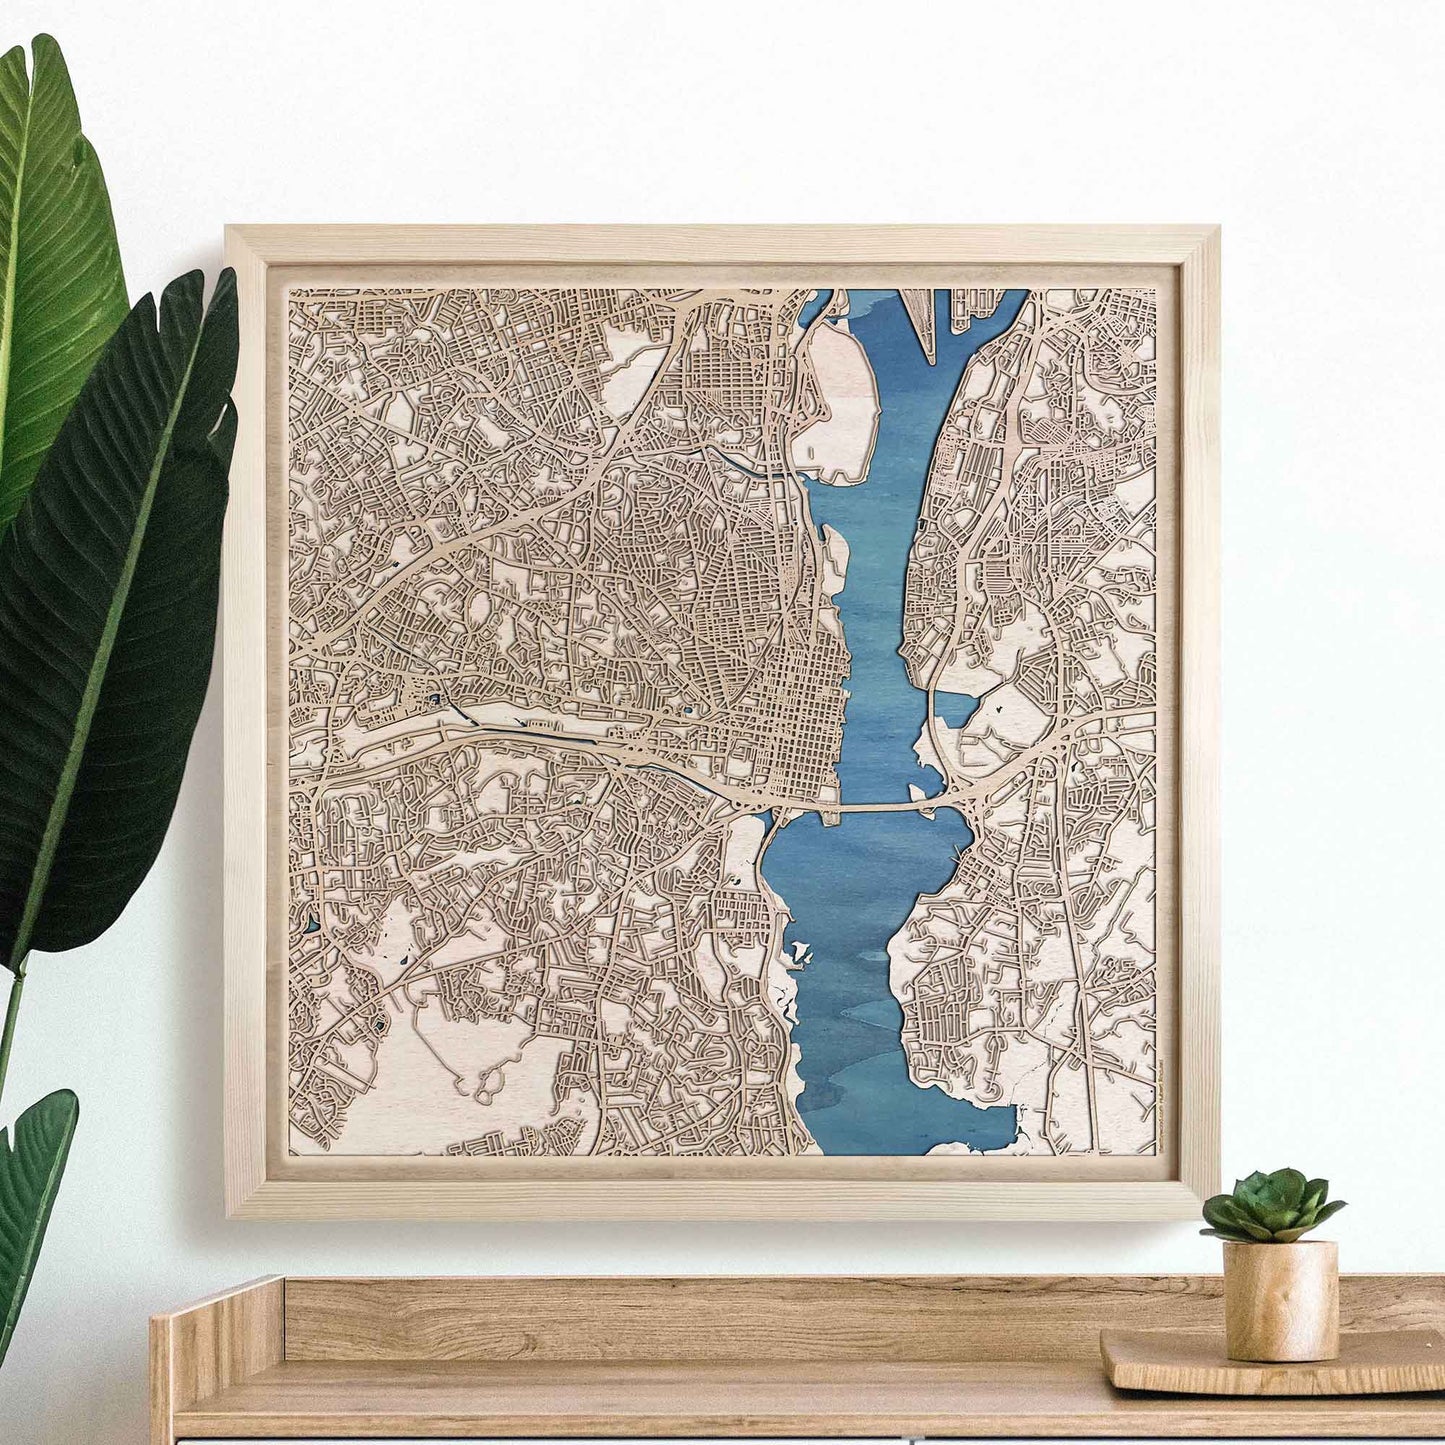 Alexandria Wooden Map by CityWood - Custom Wood Map Art - Unique Laser Cut Engraved - Anniversary Gift